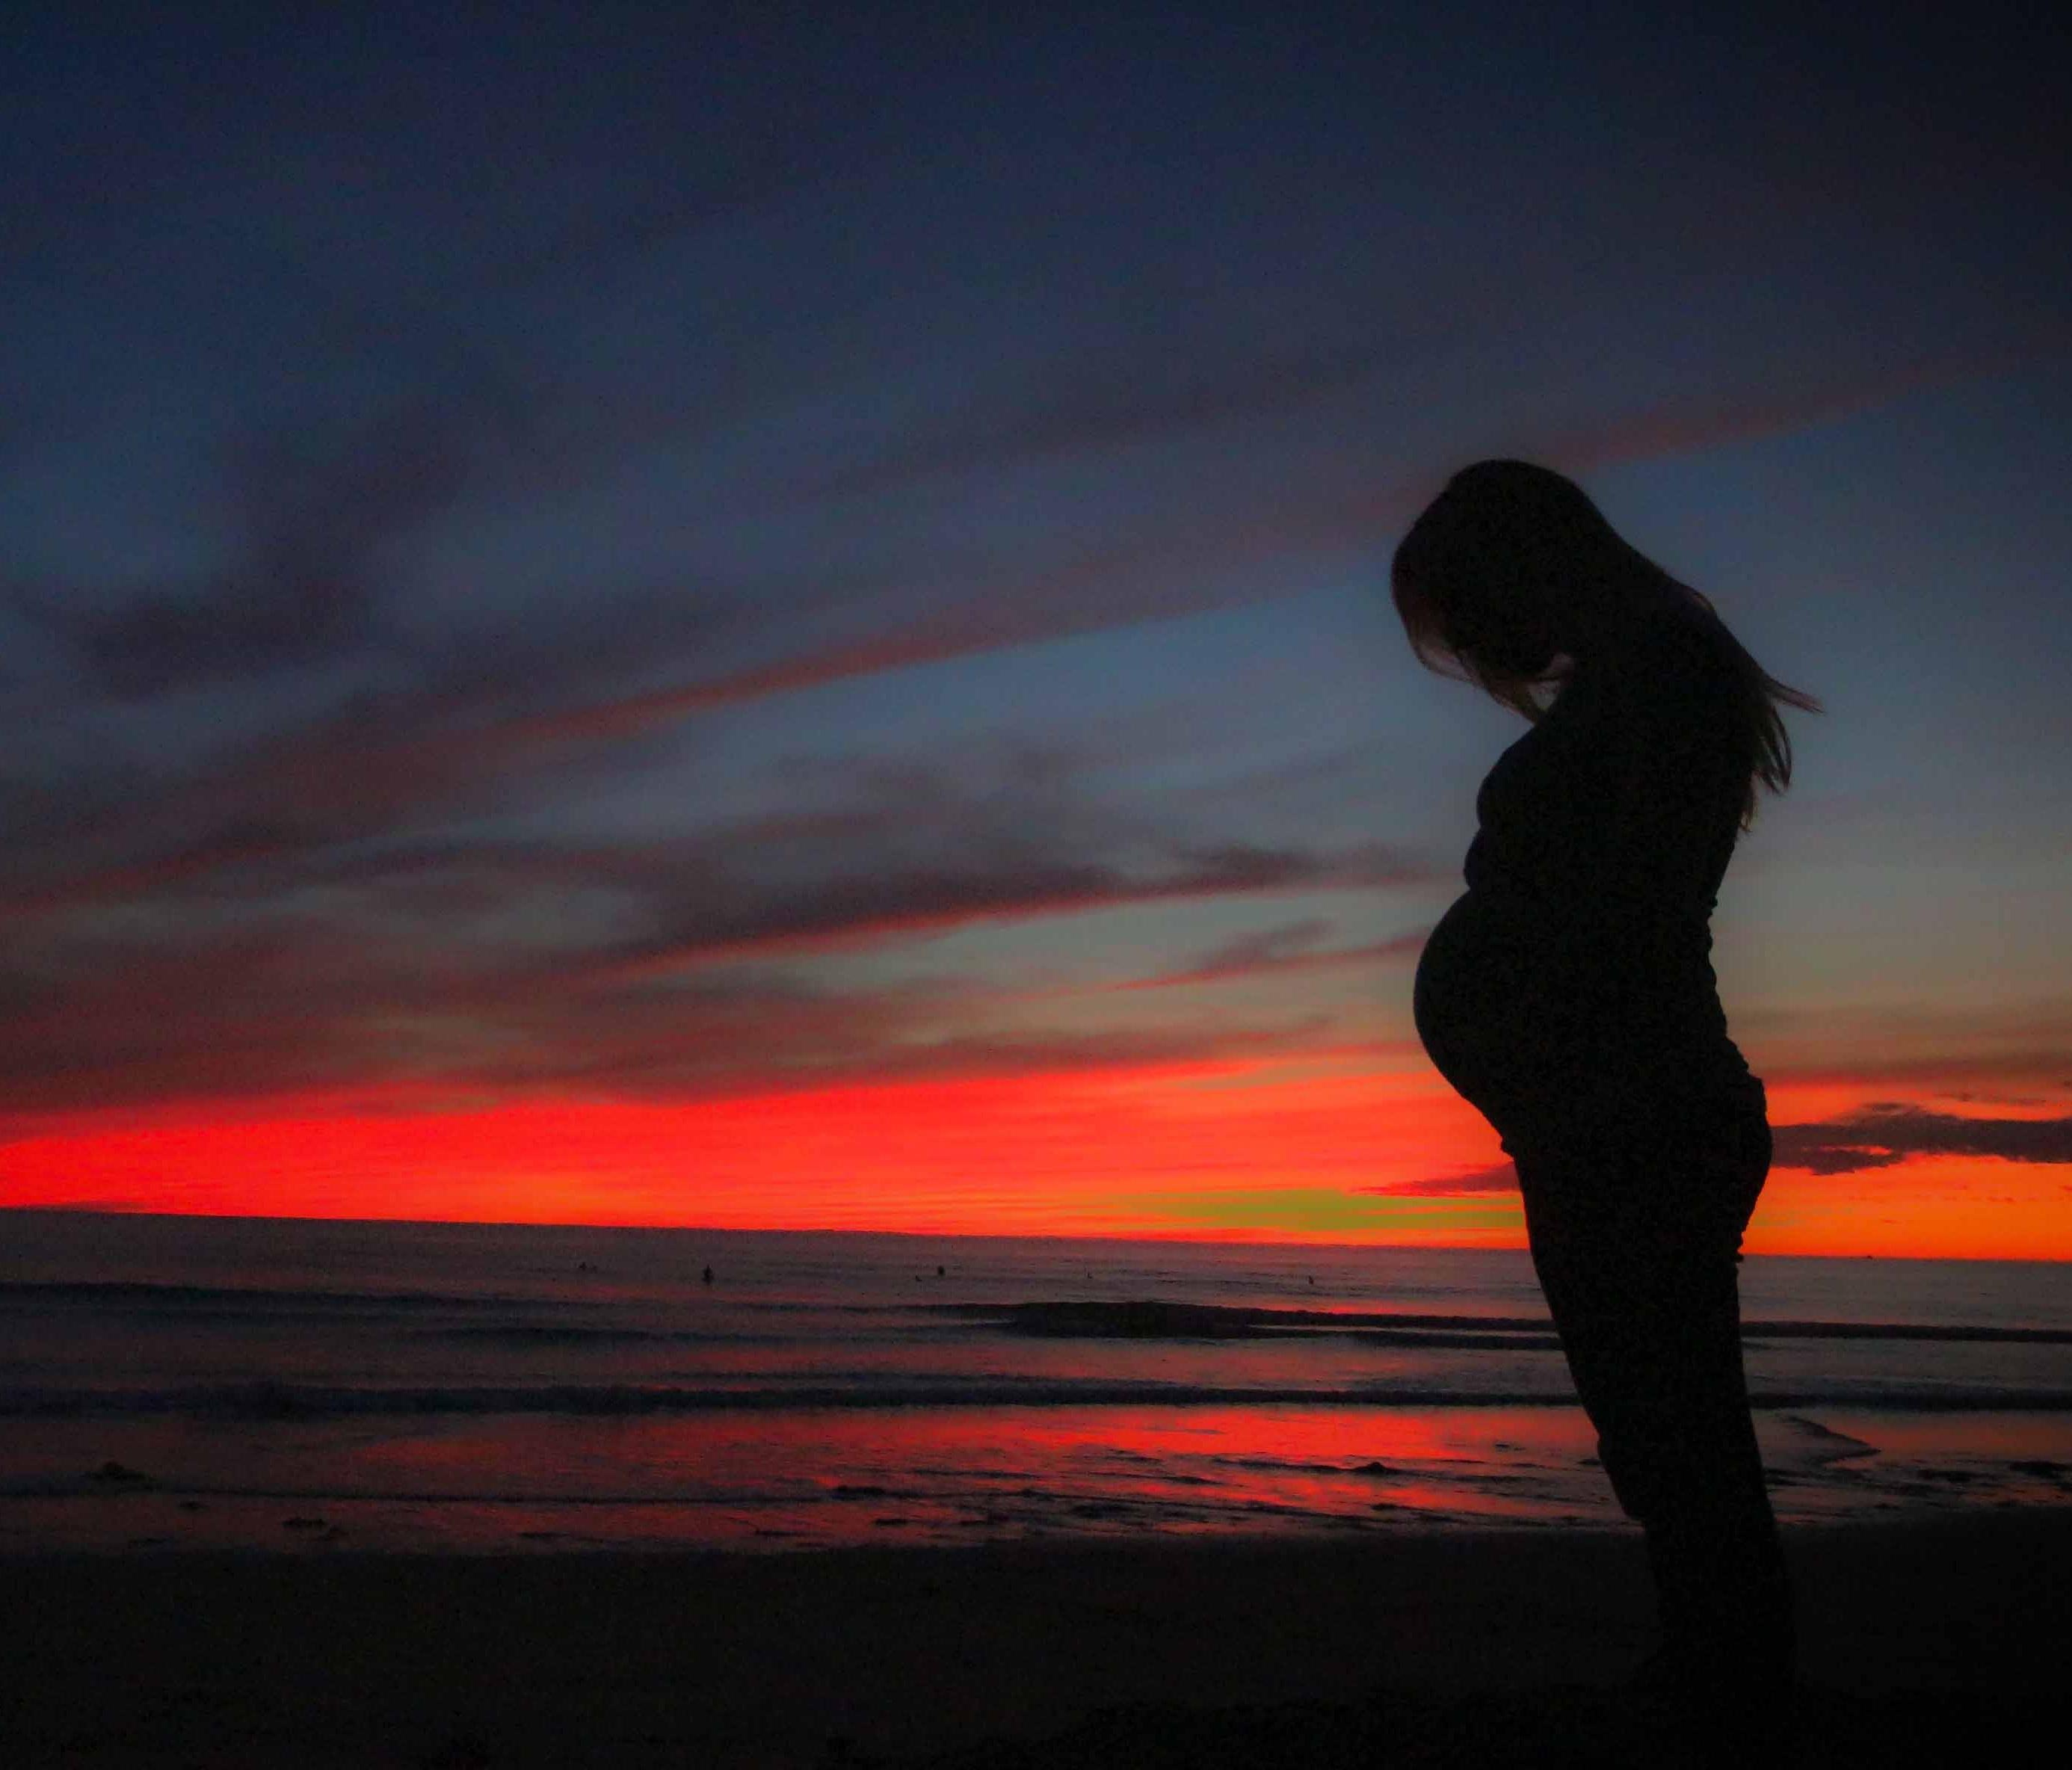 Black silhouette of pregnant woman against vibrant orange and red sunset